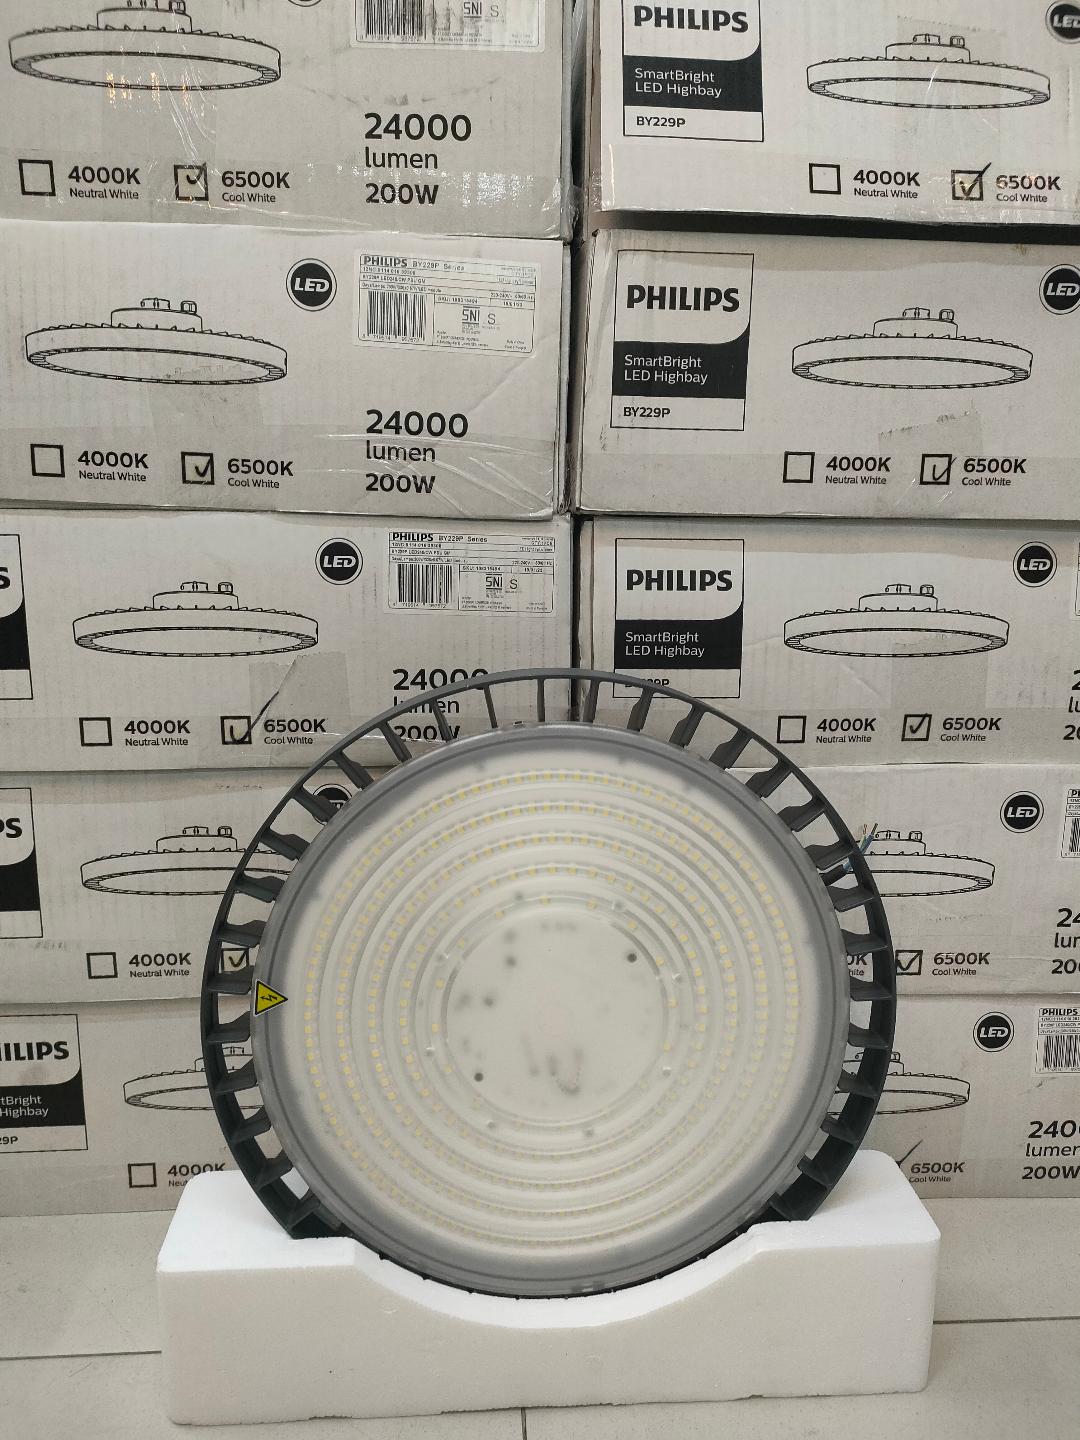 BY229P LED240/CW 200 W Highbay Philips